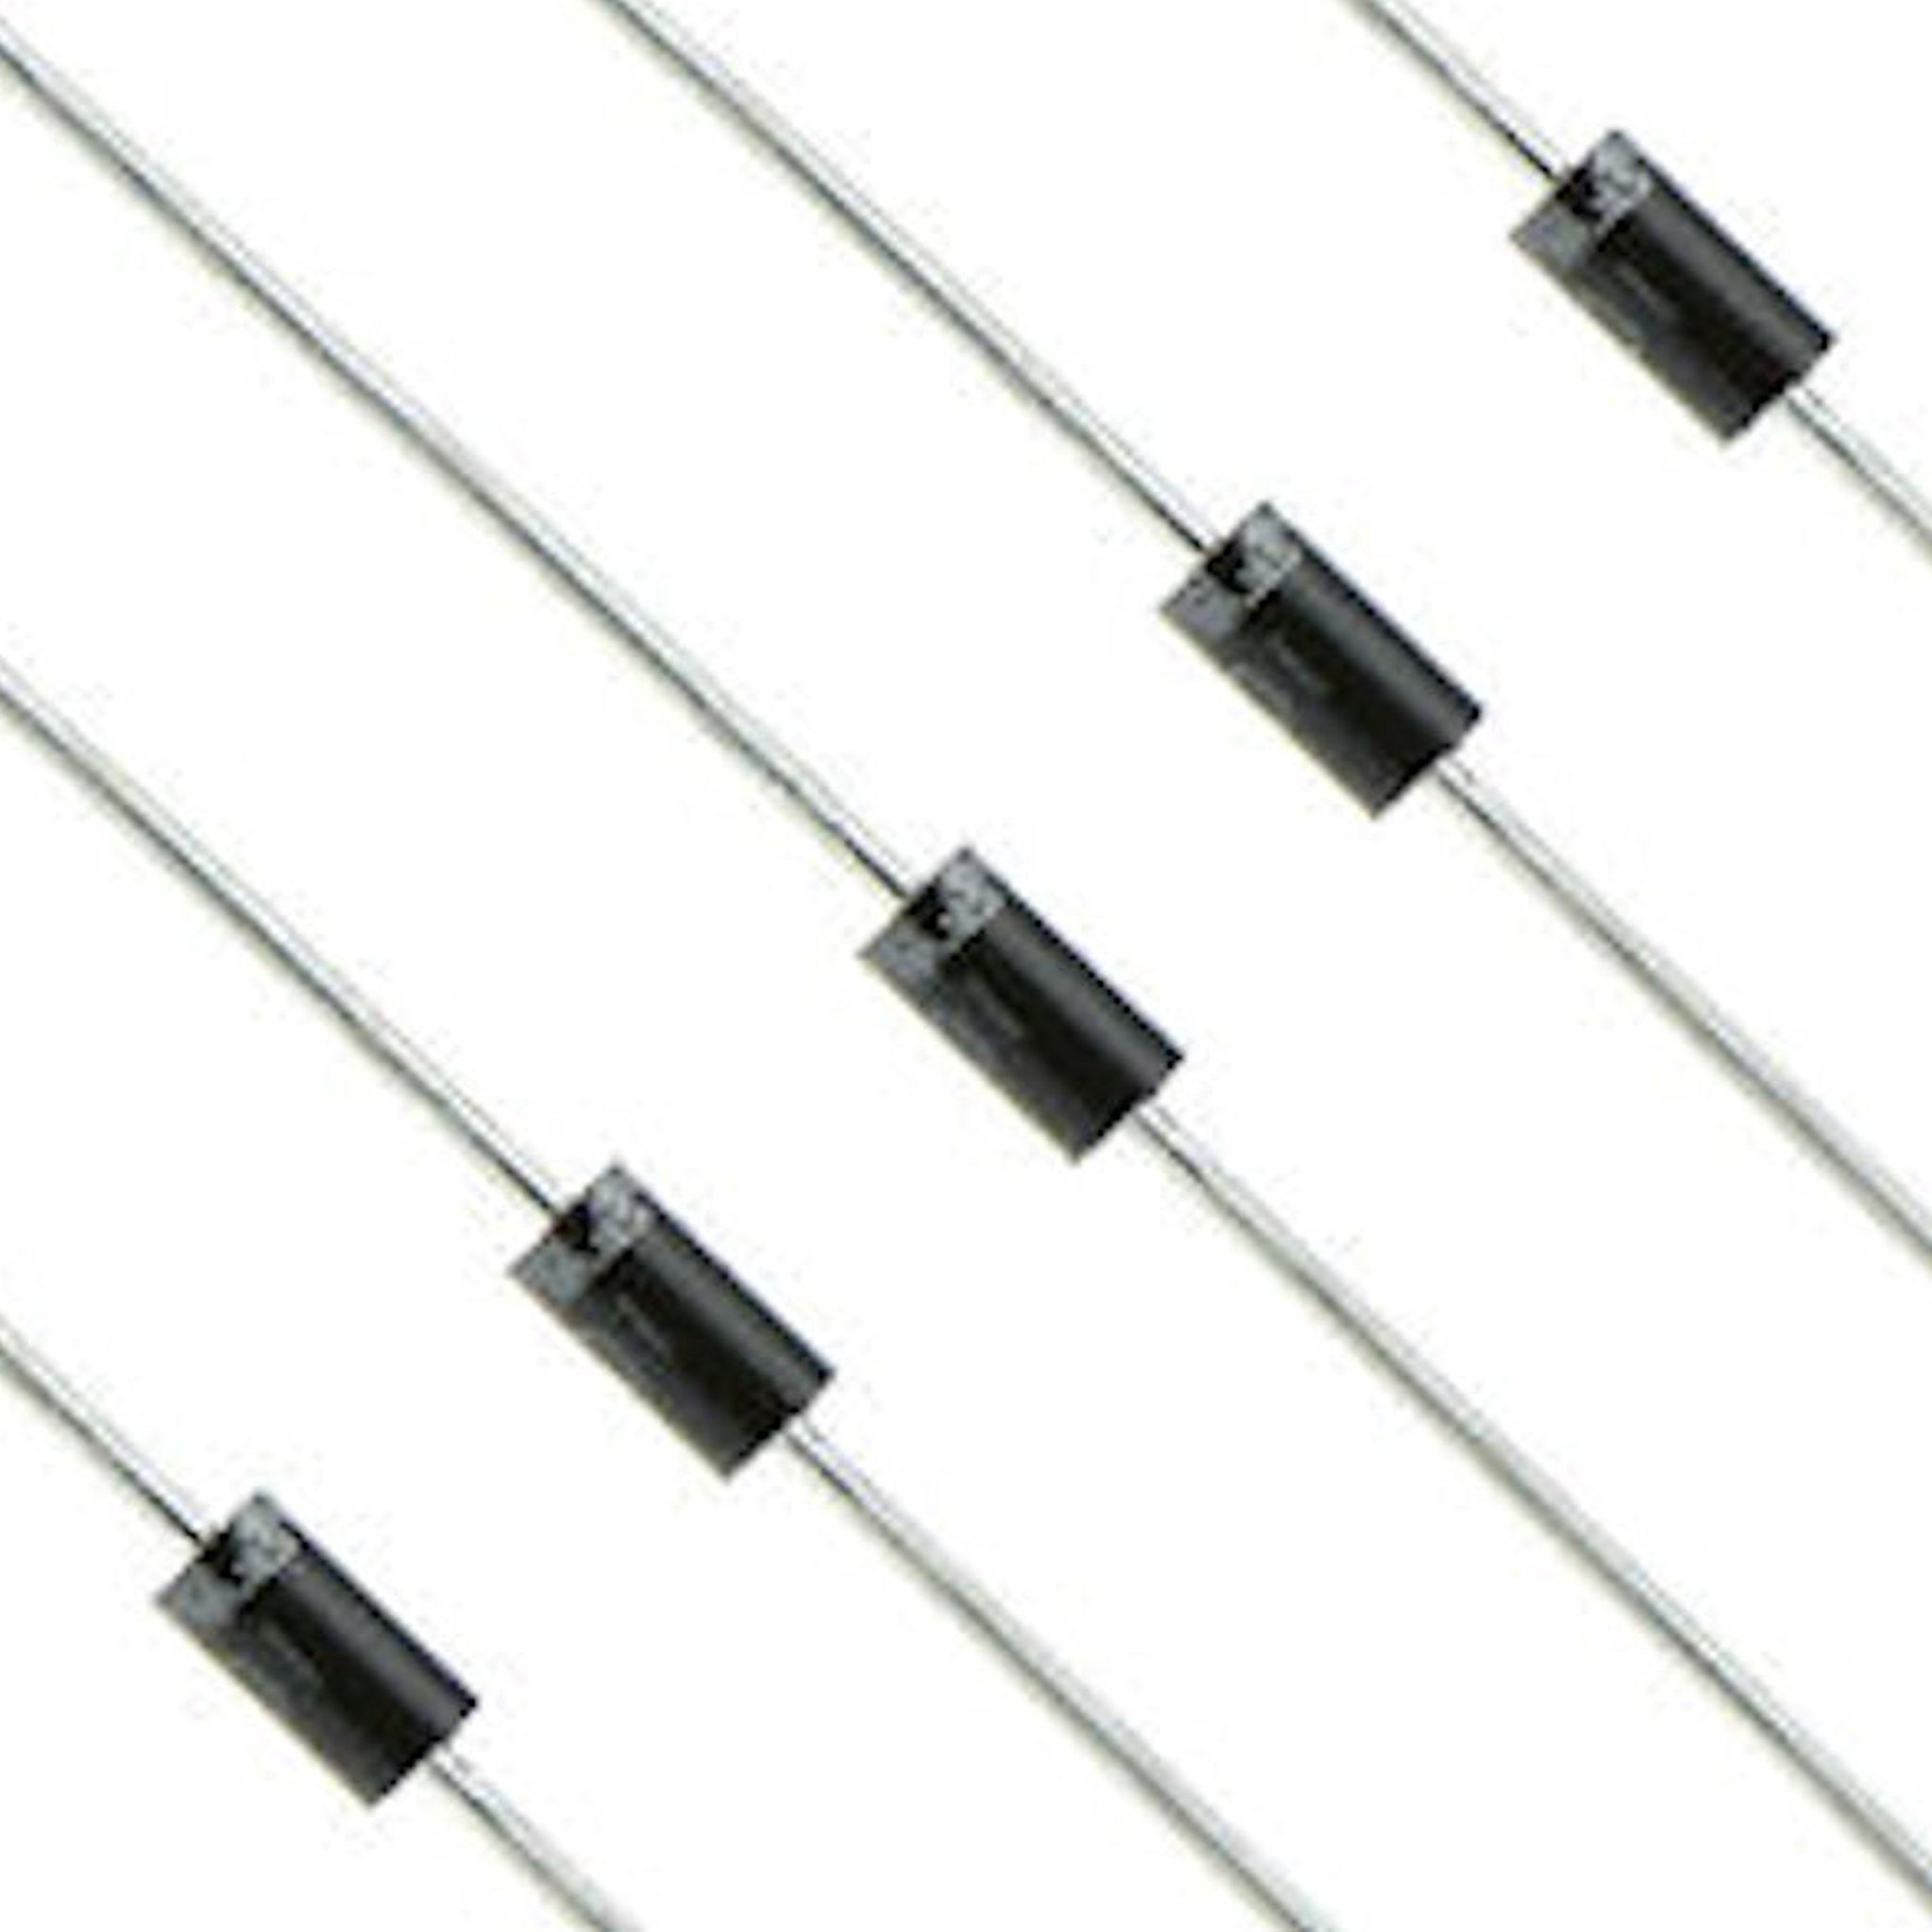 1A 50V Silicon Rectifier Diode  Pack of 10